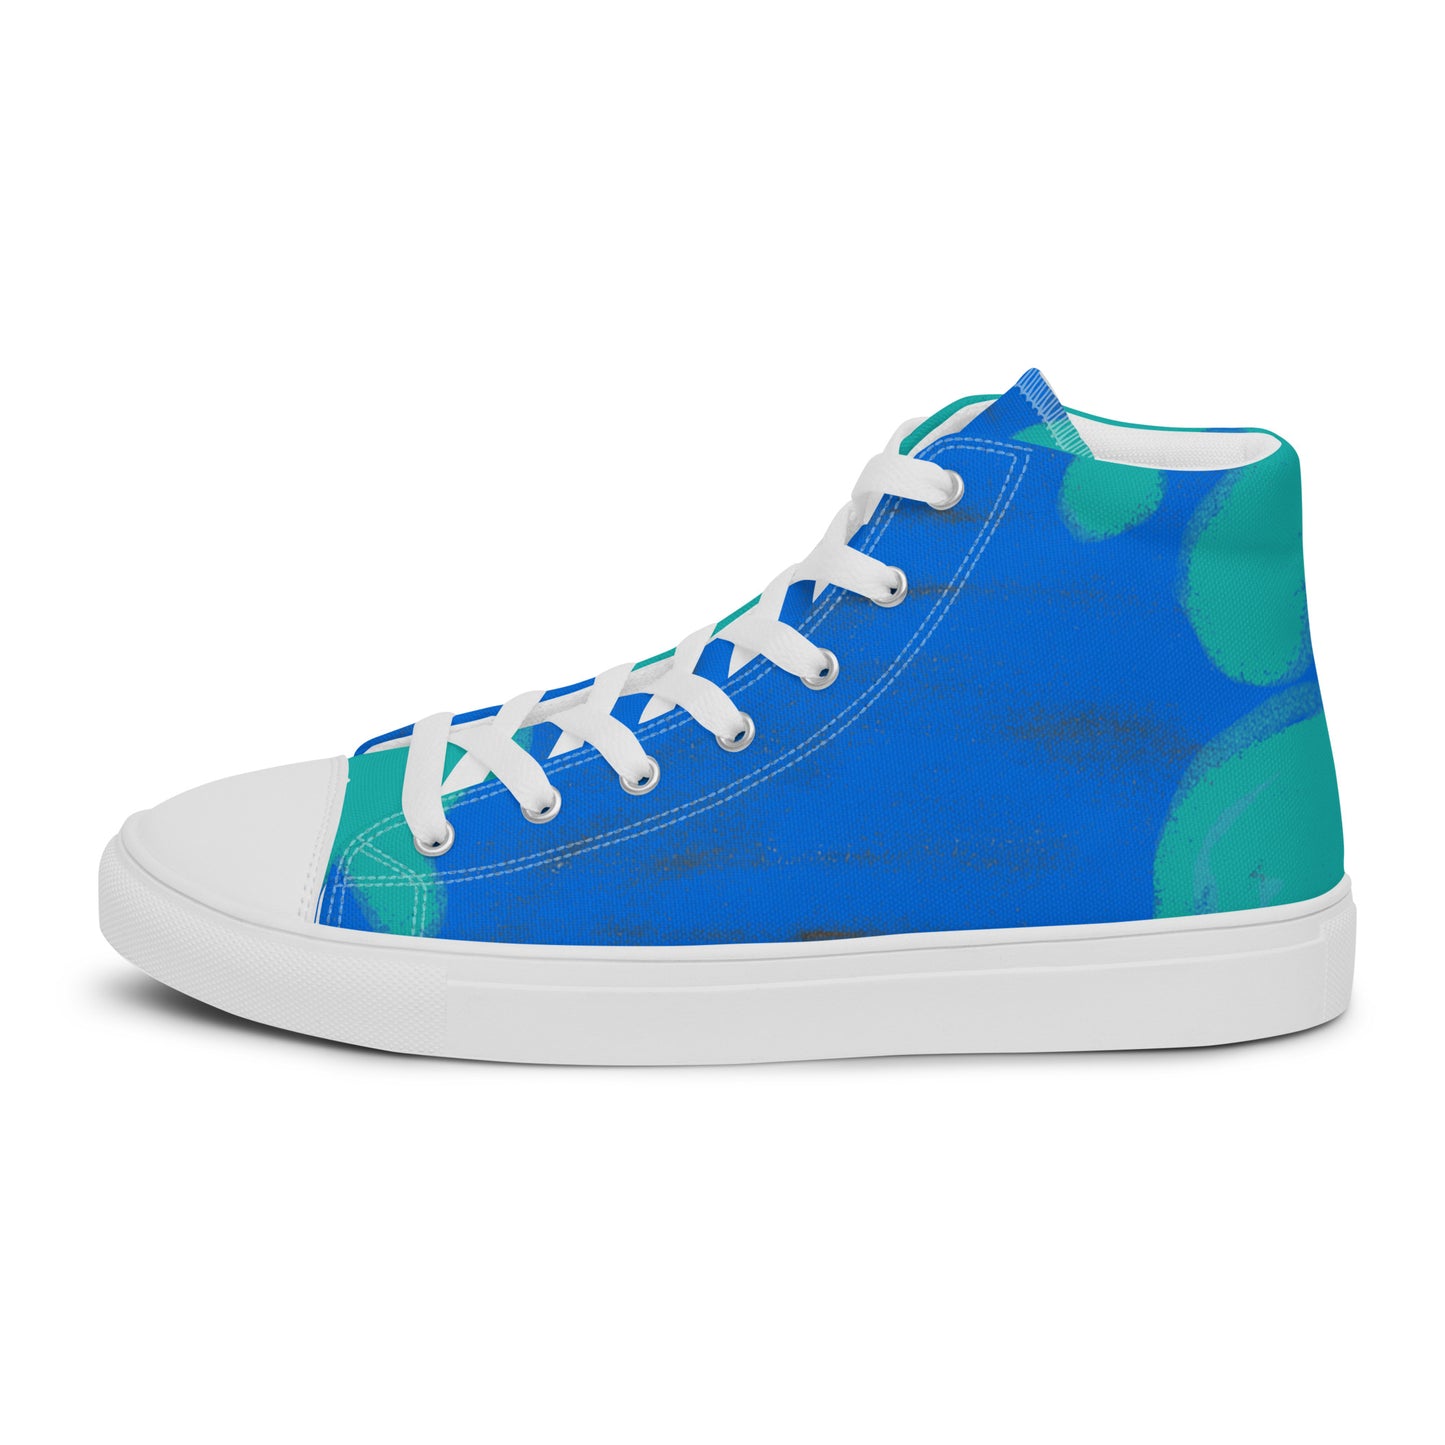 Earth - Men’s high top canvas shoes